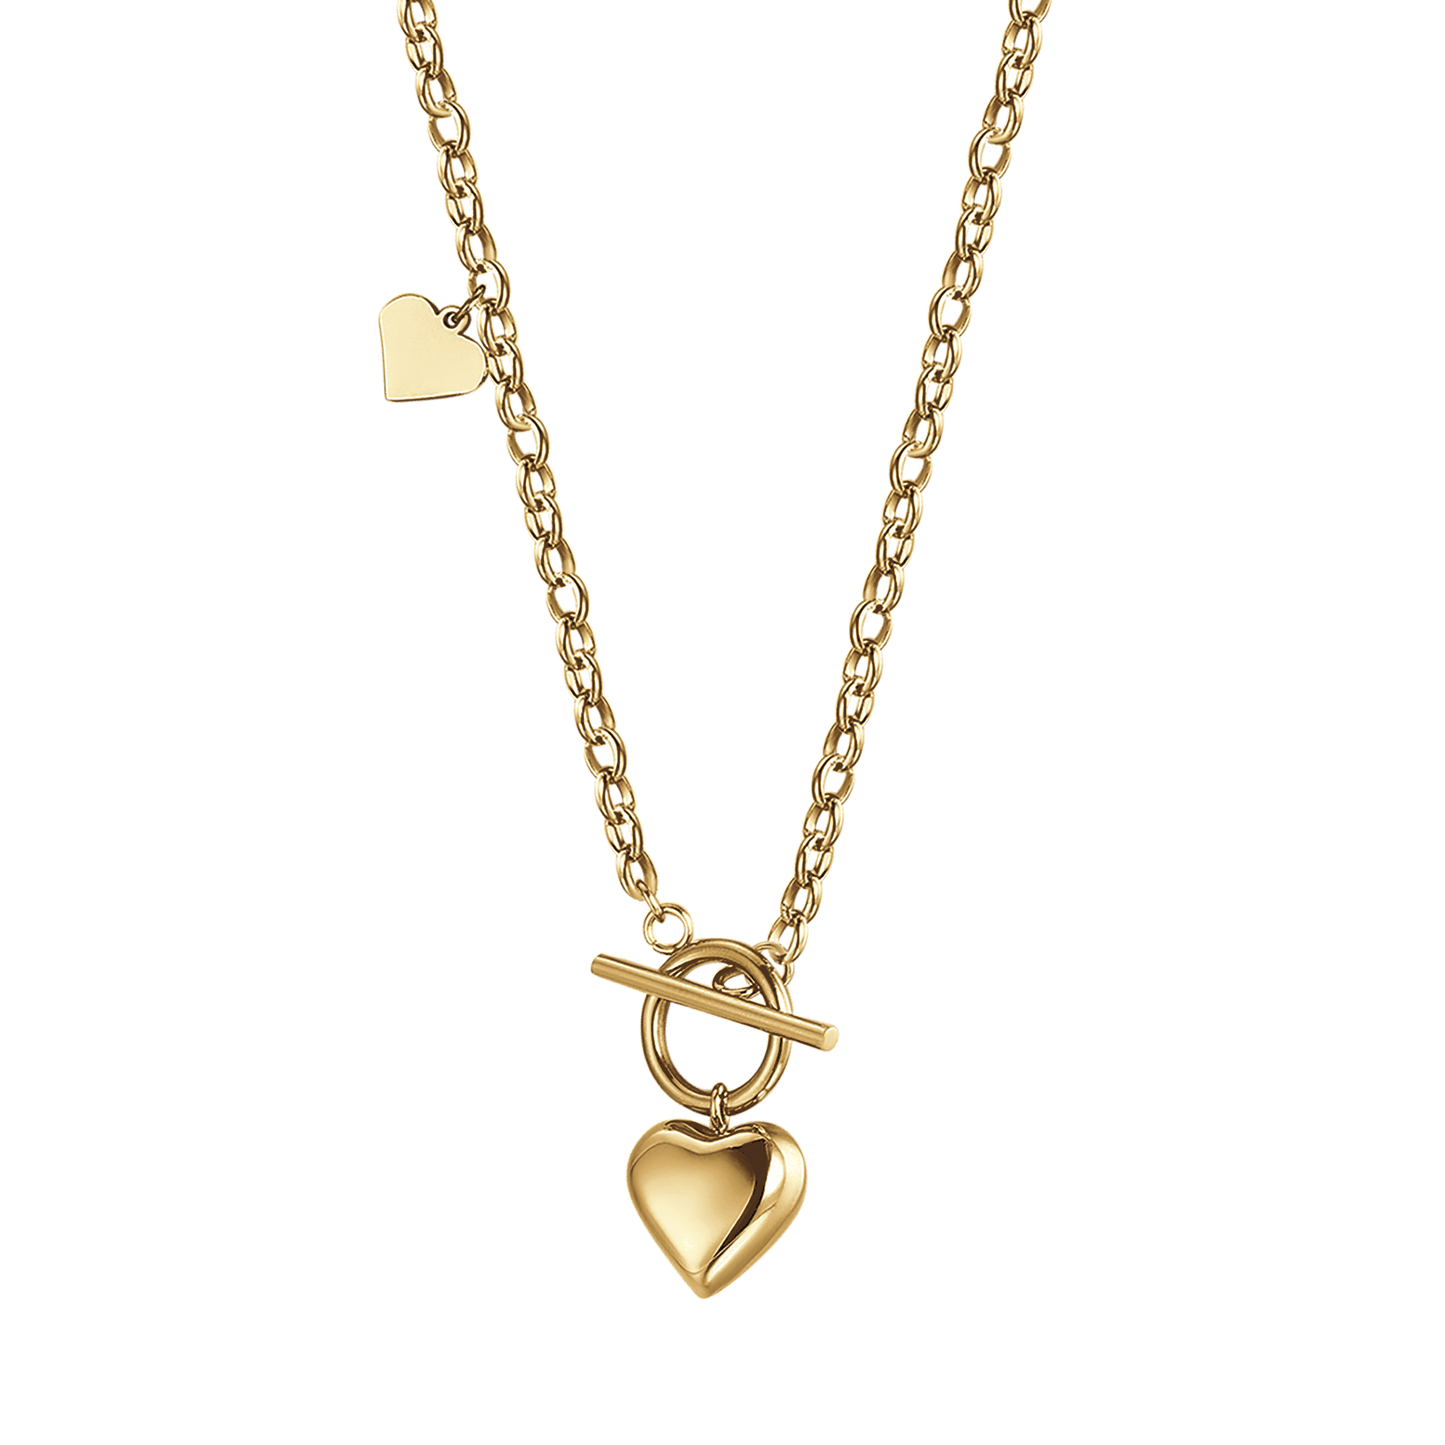 WOMEN'S IP GOLD STEEL NECKLACE WITH TBAR CLASP AND HEART